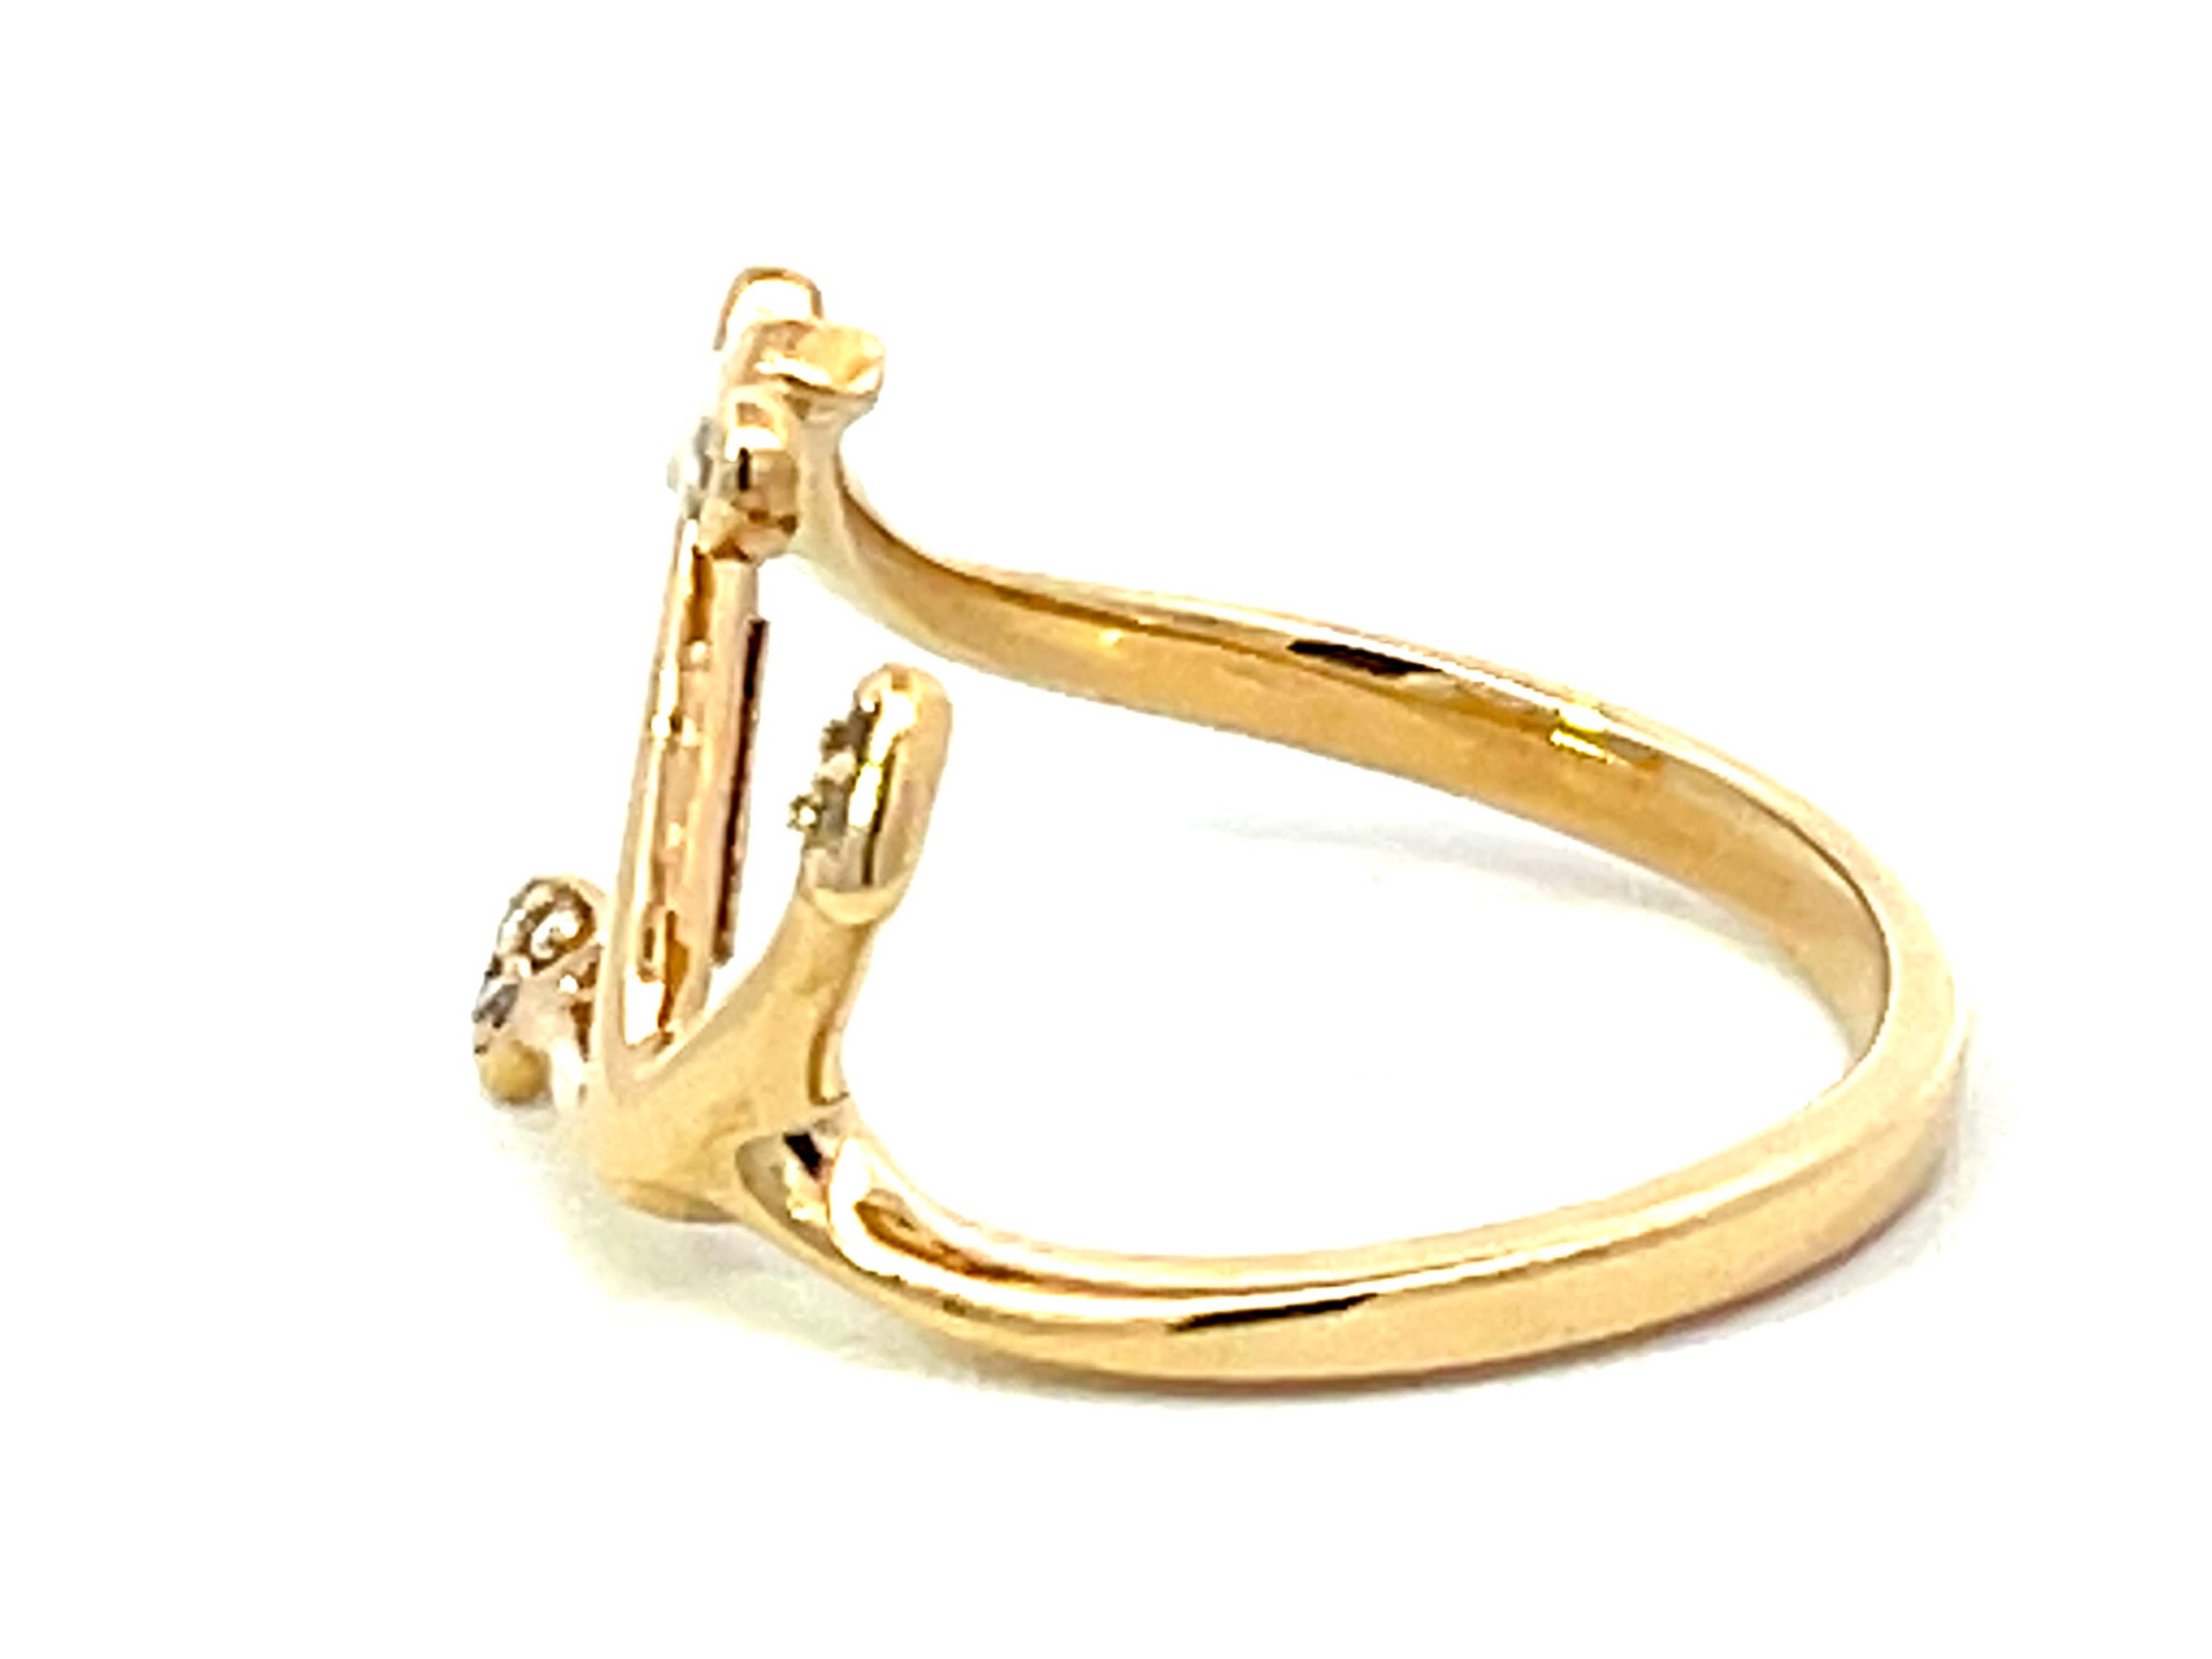 Nahoku Diamond Anchor Ring in 14K Yellow Gold In Excellent Condition For Sale In Honolulu, HI